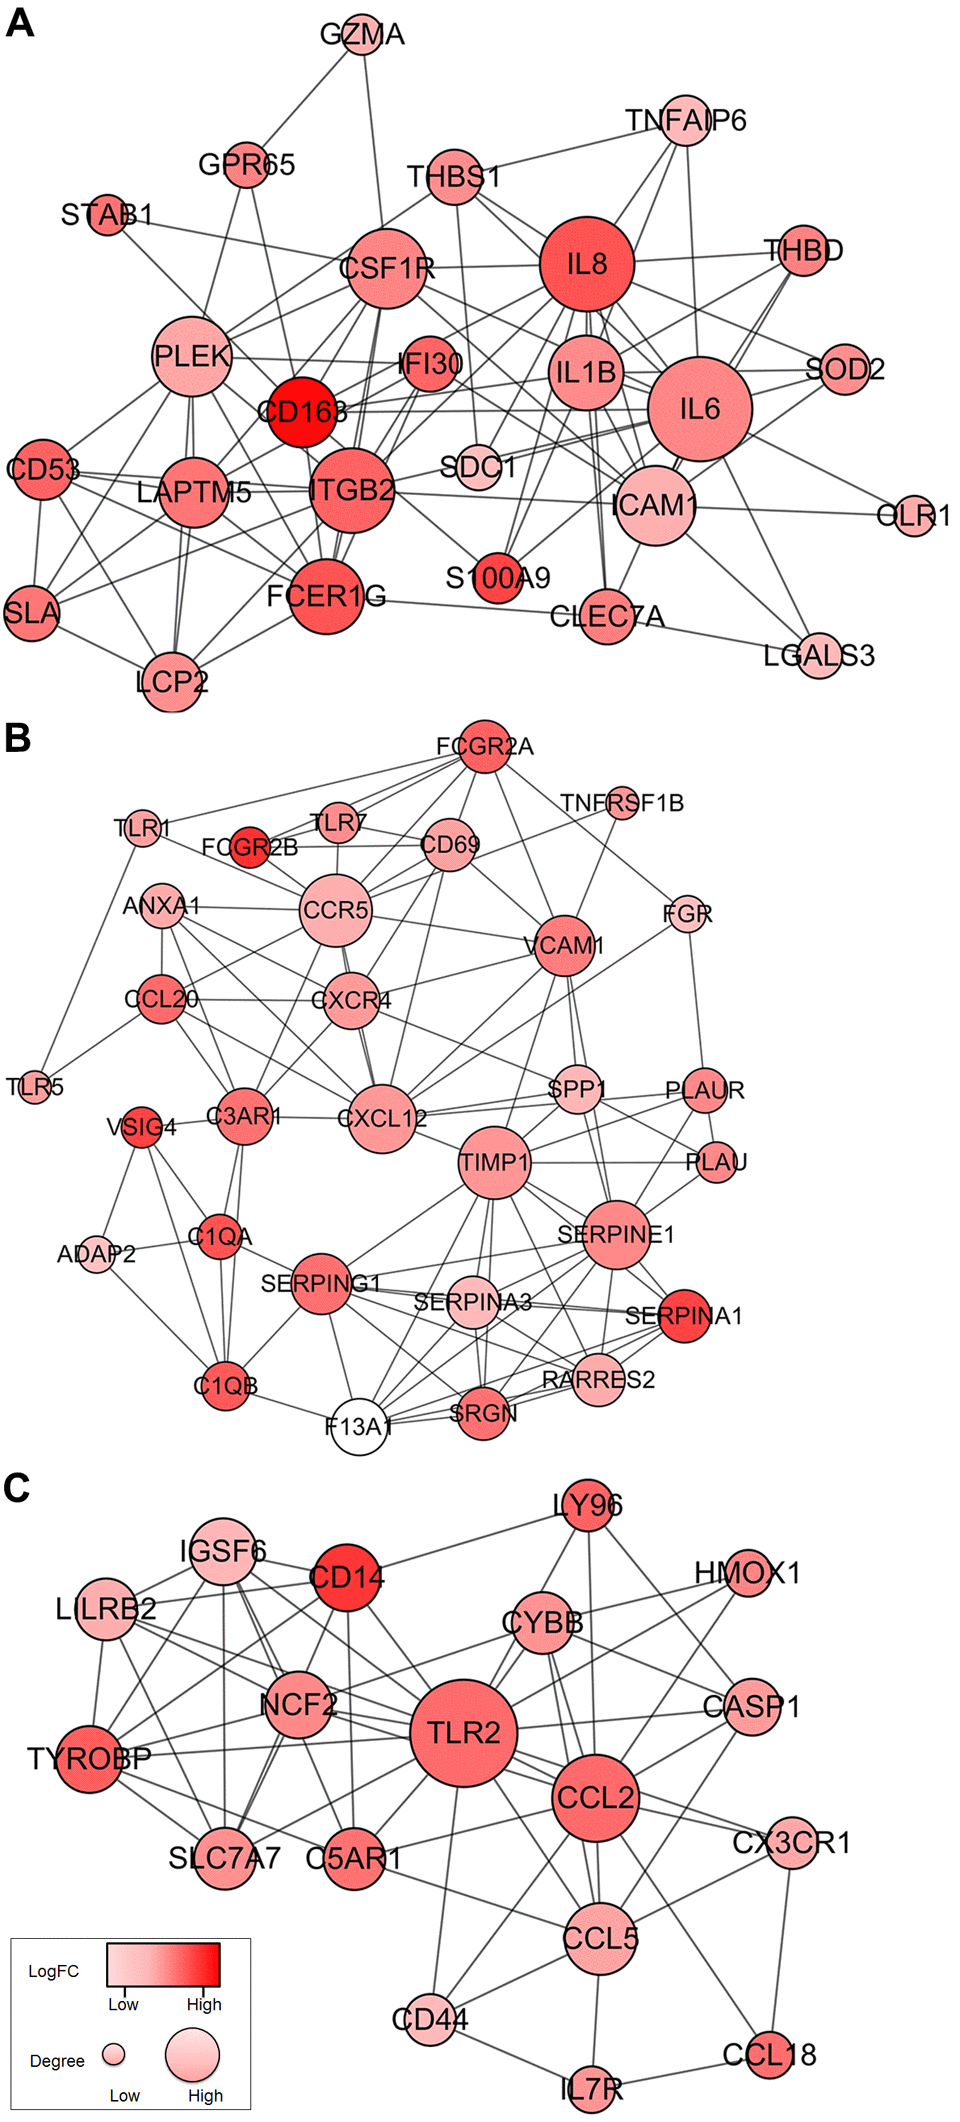 Top 3 PPI networks of IL6, TIMP1, and TLR2 modules. The color of a node in the PPI network reflects the log (FC) value of the Z score of gene expression, and the size of node indicates the number of interacting proteins with the designated protein.